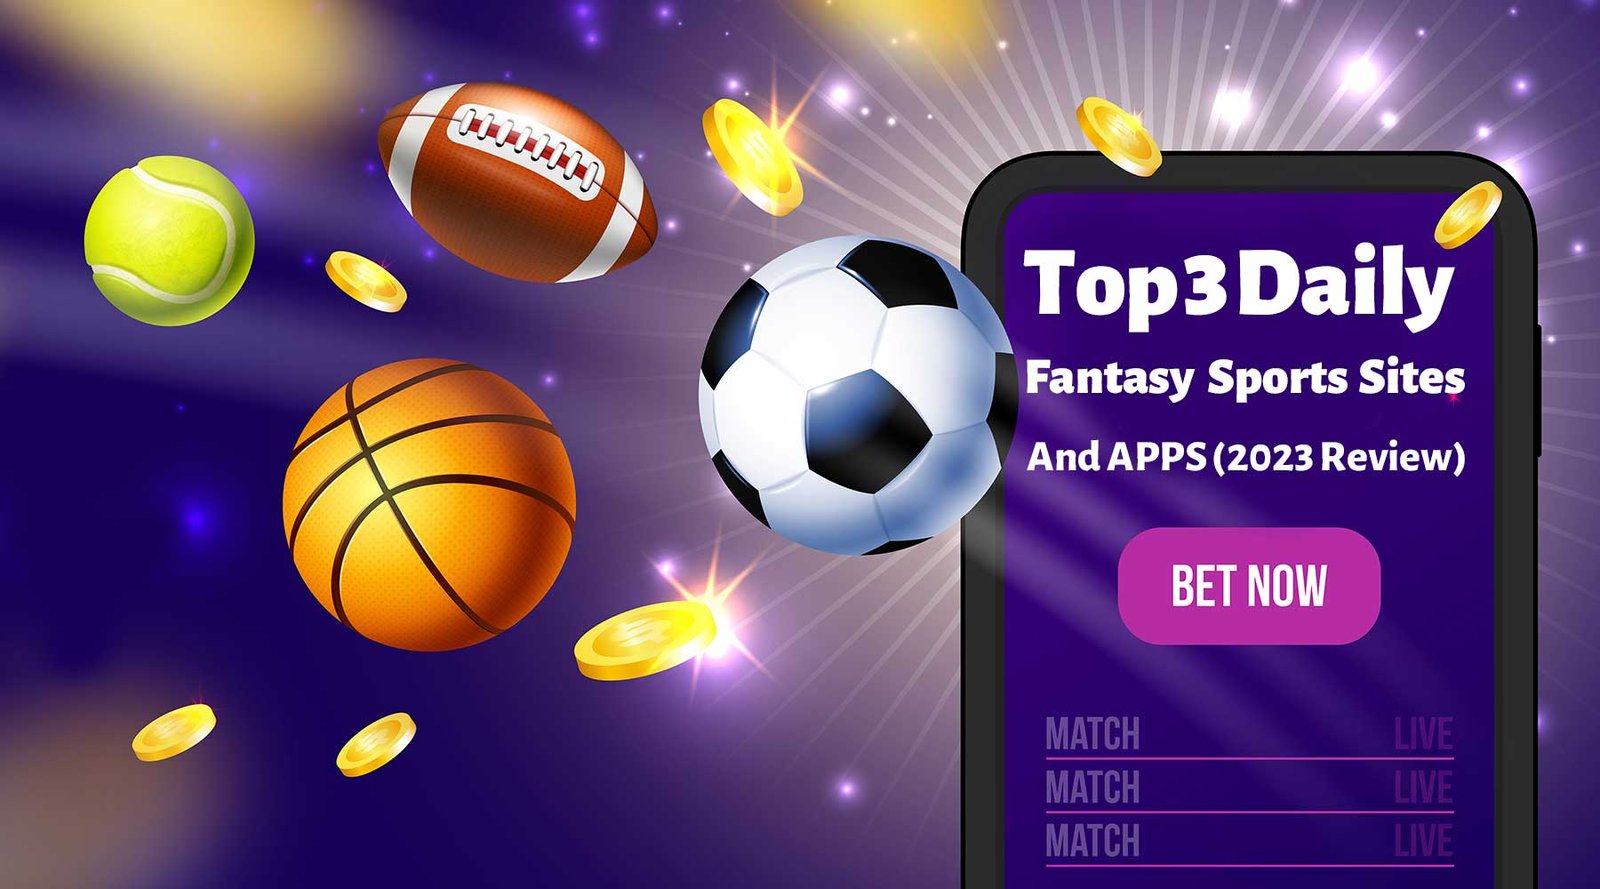 Top 3 Daily Fantasy Sports Sites And APPS (2023 Review)